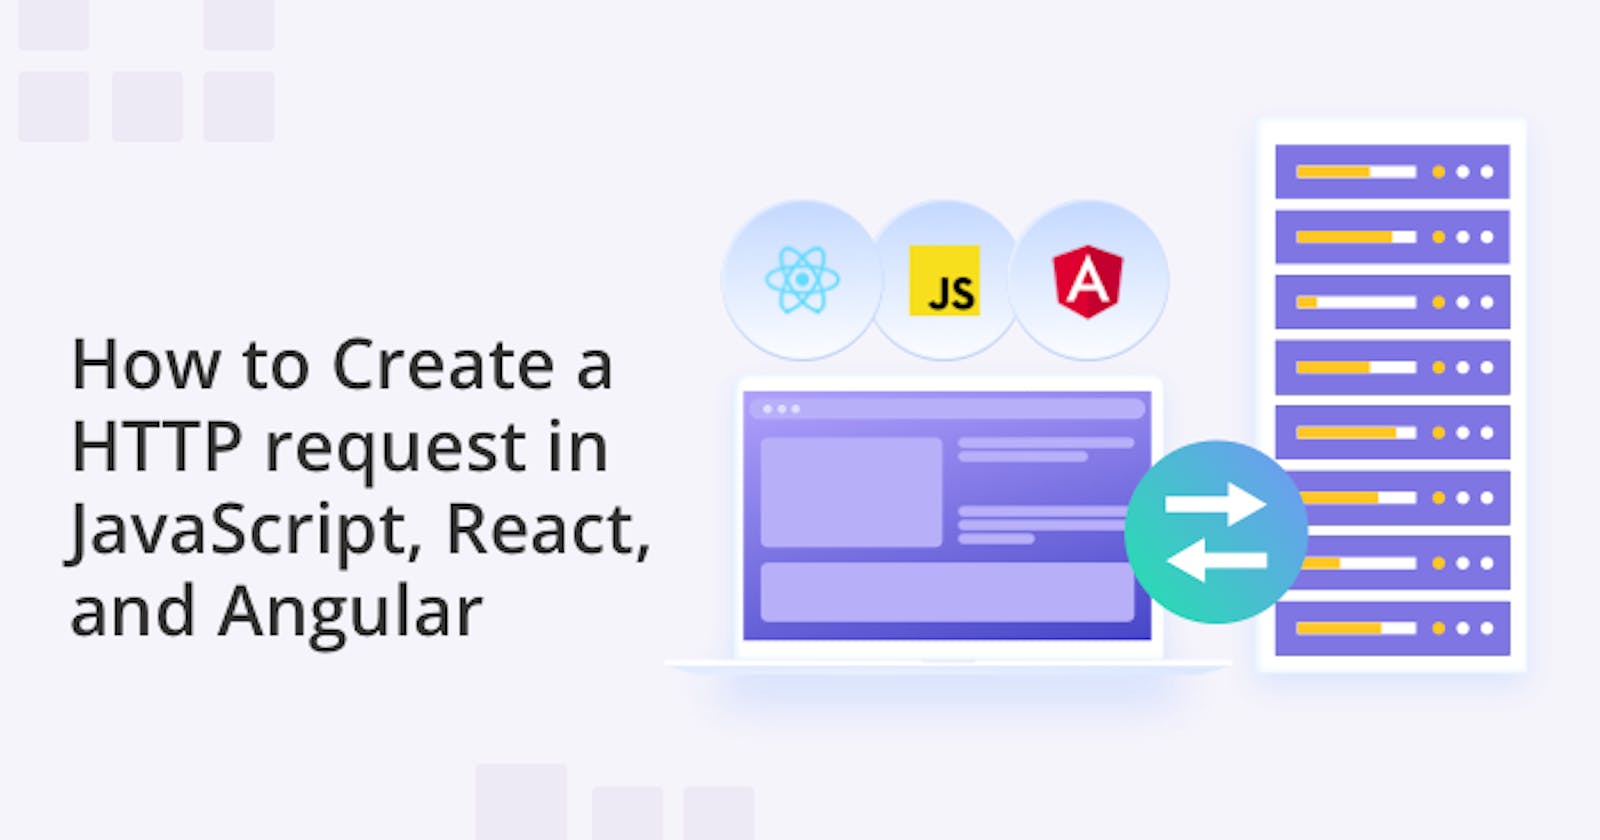 How to Create a HTTP request in JavaScript, React, and Angular